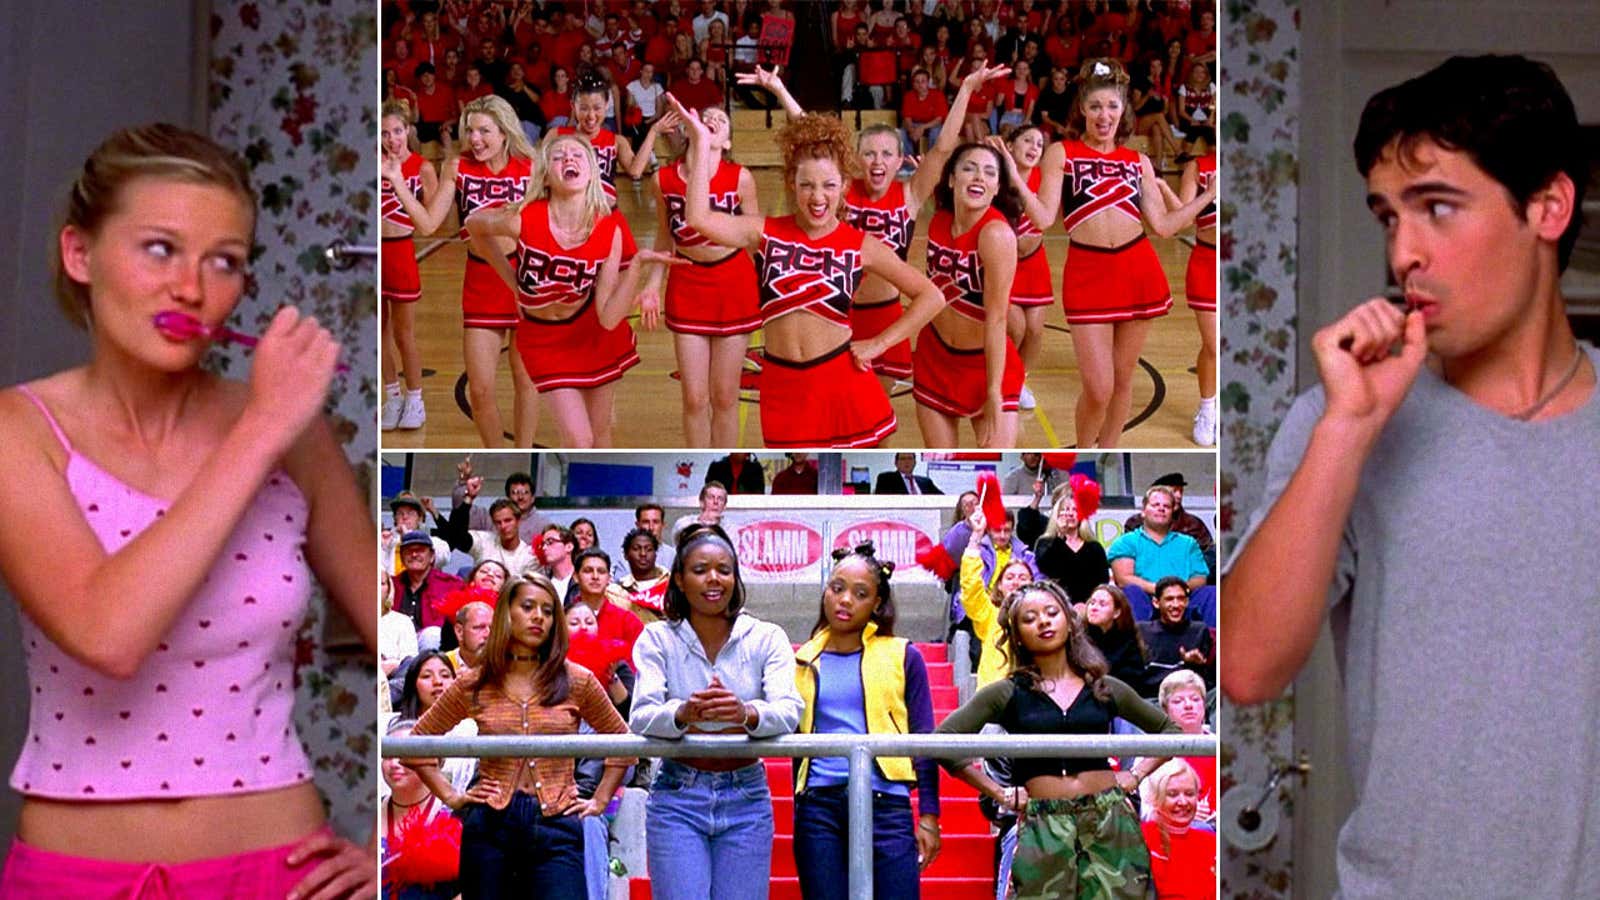 Bring It On' 20th Anniversary: How the Iconic Audition Scene Came